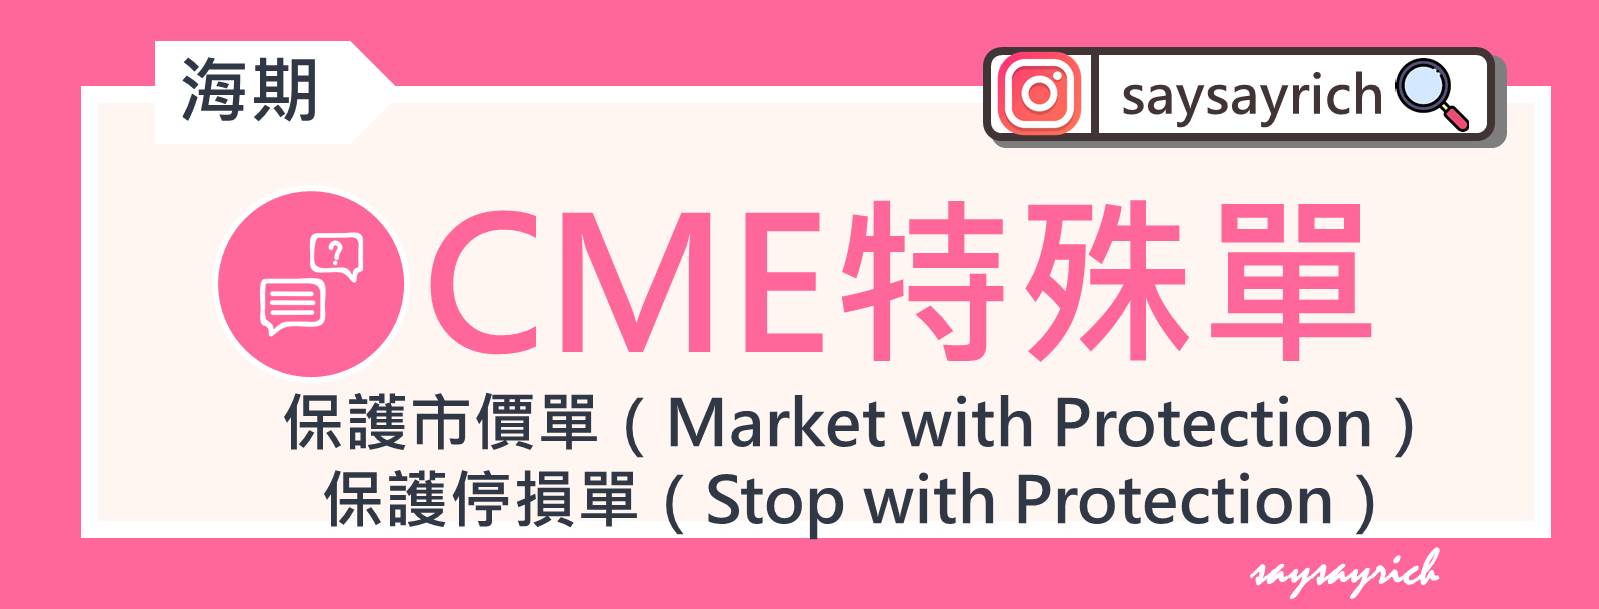 CME 保護市價單、保護停損單機制說明